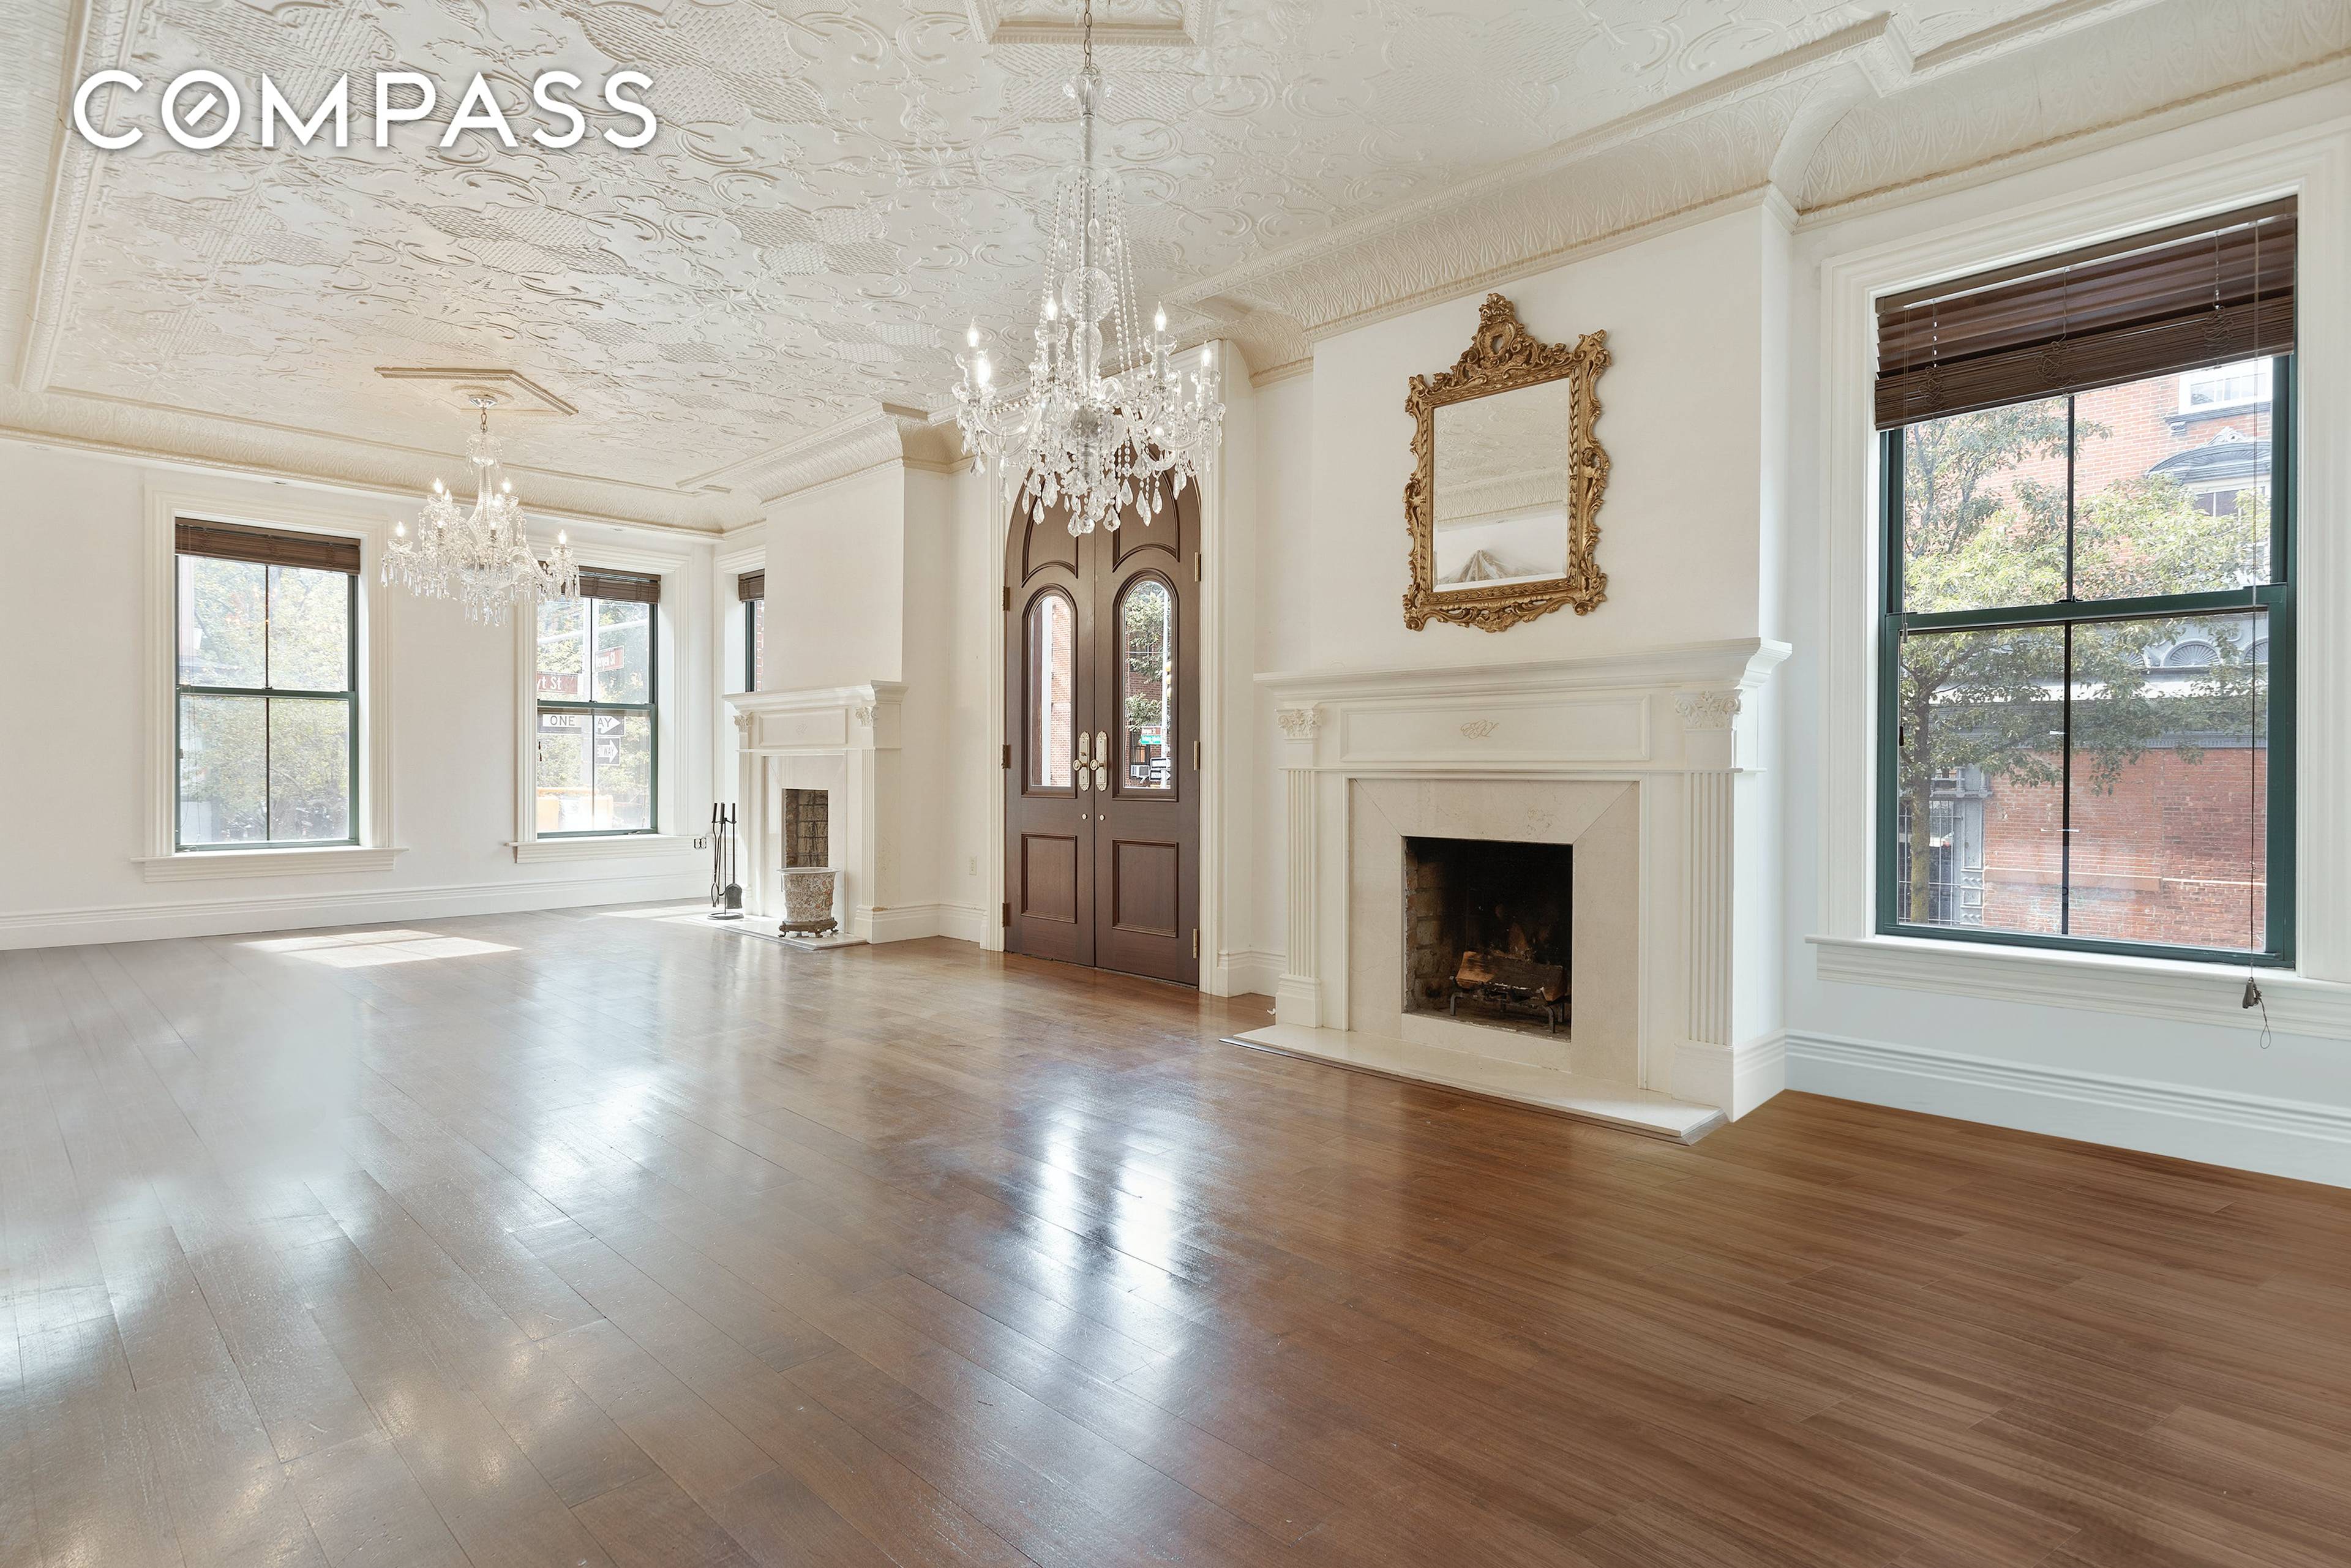 Beautifully renovated, this elegant, spacious two bedroom, two and a half bathroom parlor floor duplex is filled with light and restored original details throughout.